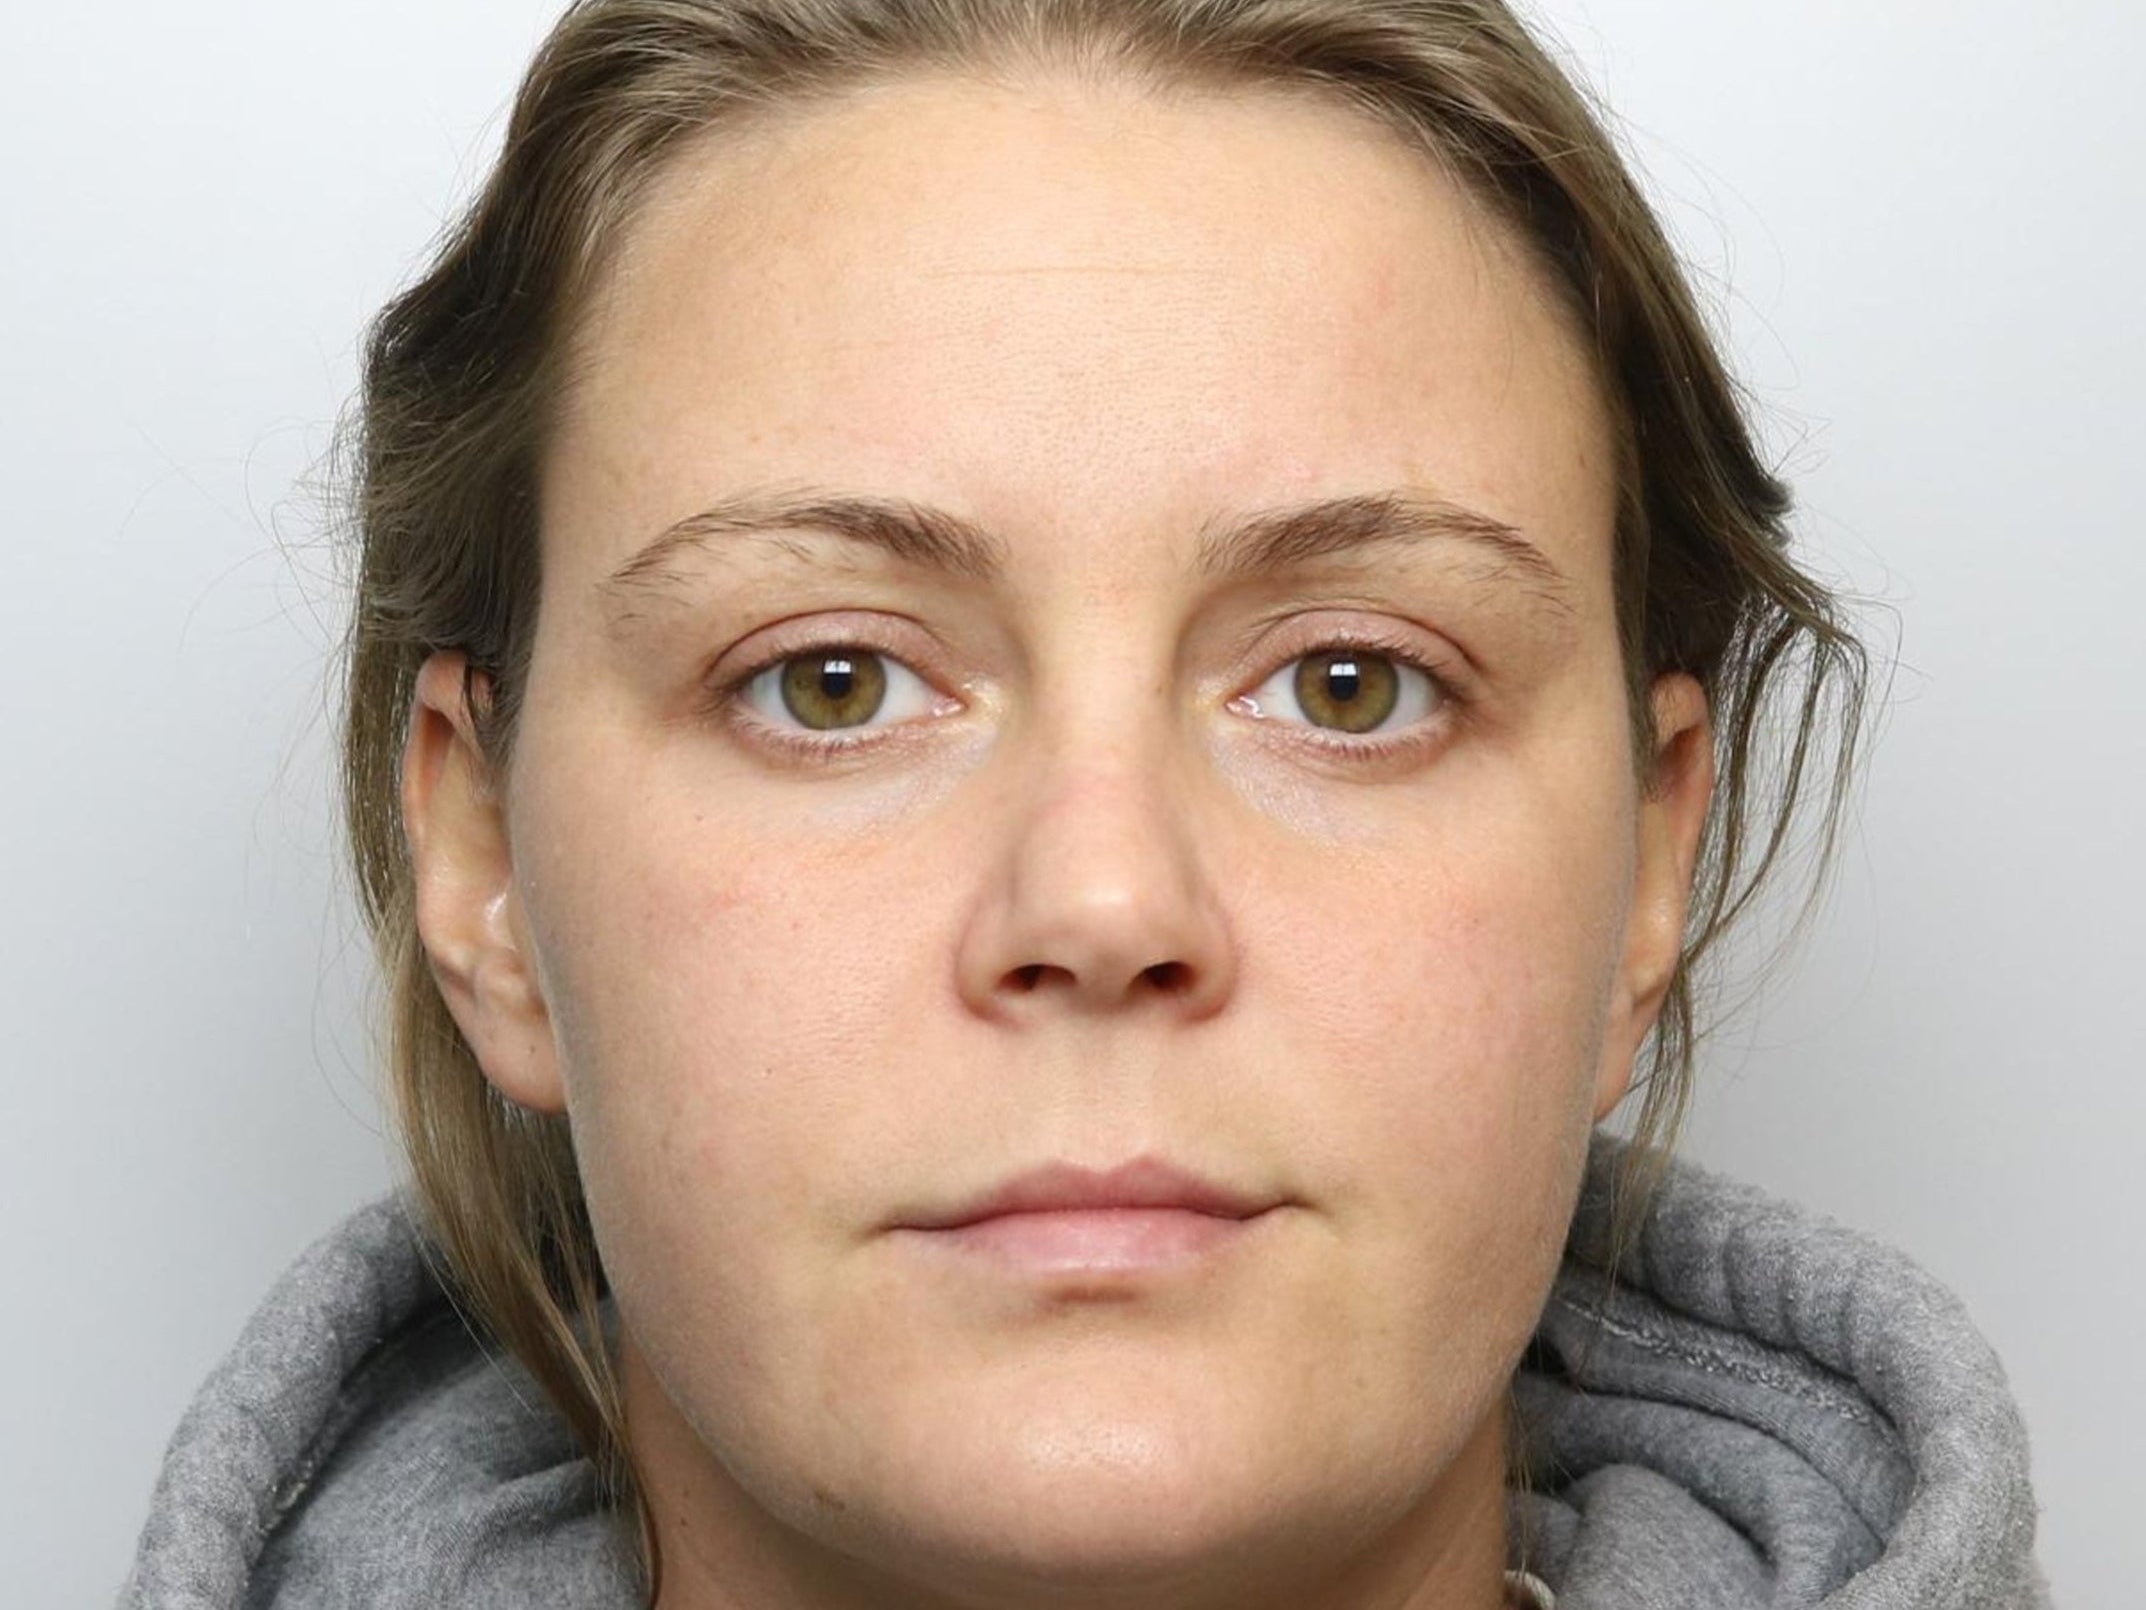 Savannah Brockhill, branded ‘pure evil’, was jailed for life with a minimum term of 25 years for the murder of her partner’s 16-month-old daughter, Star Hobson